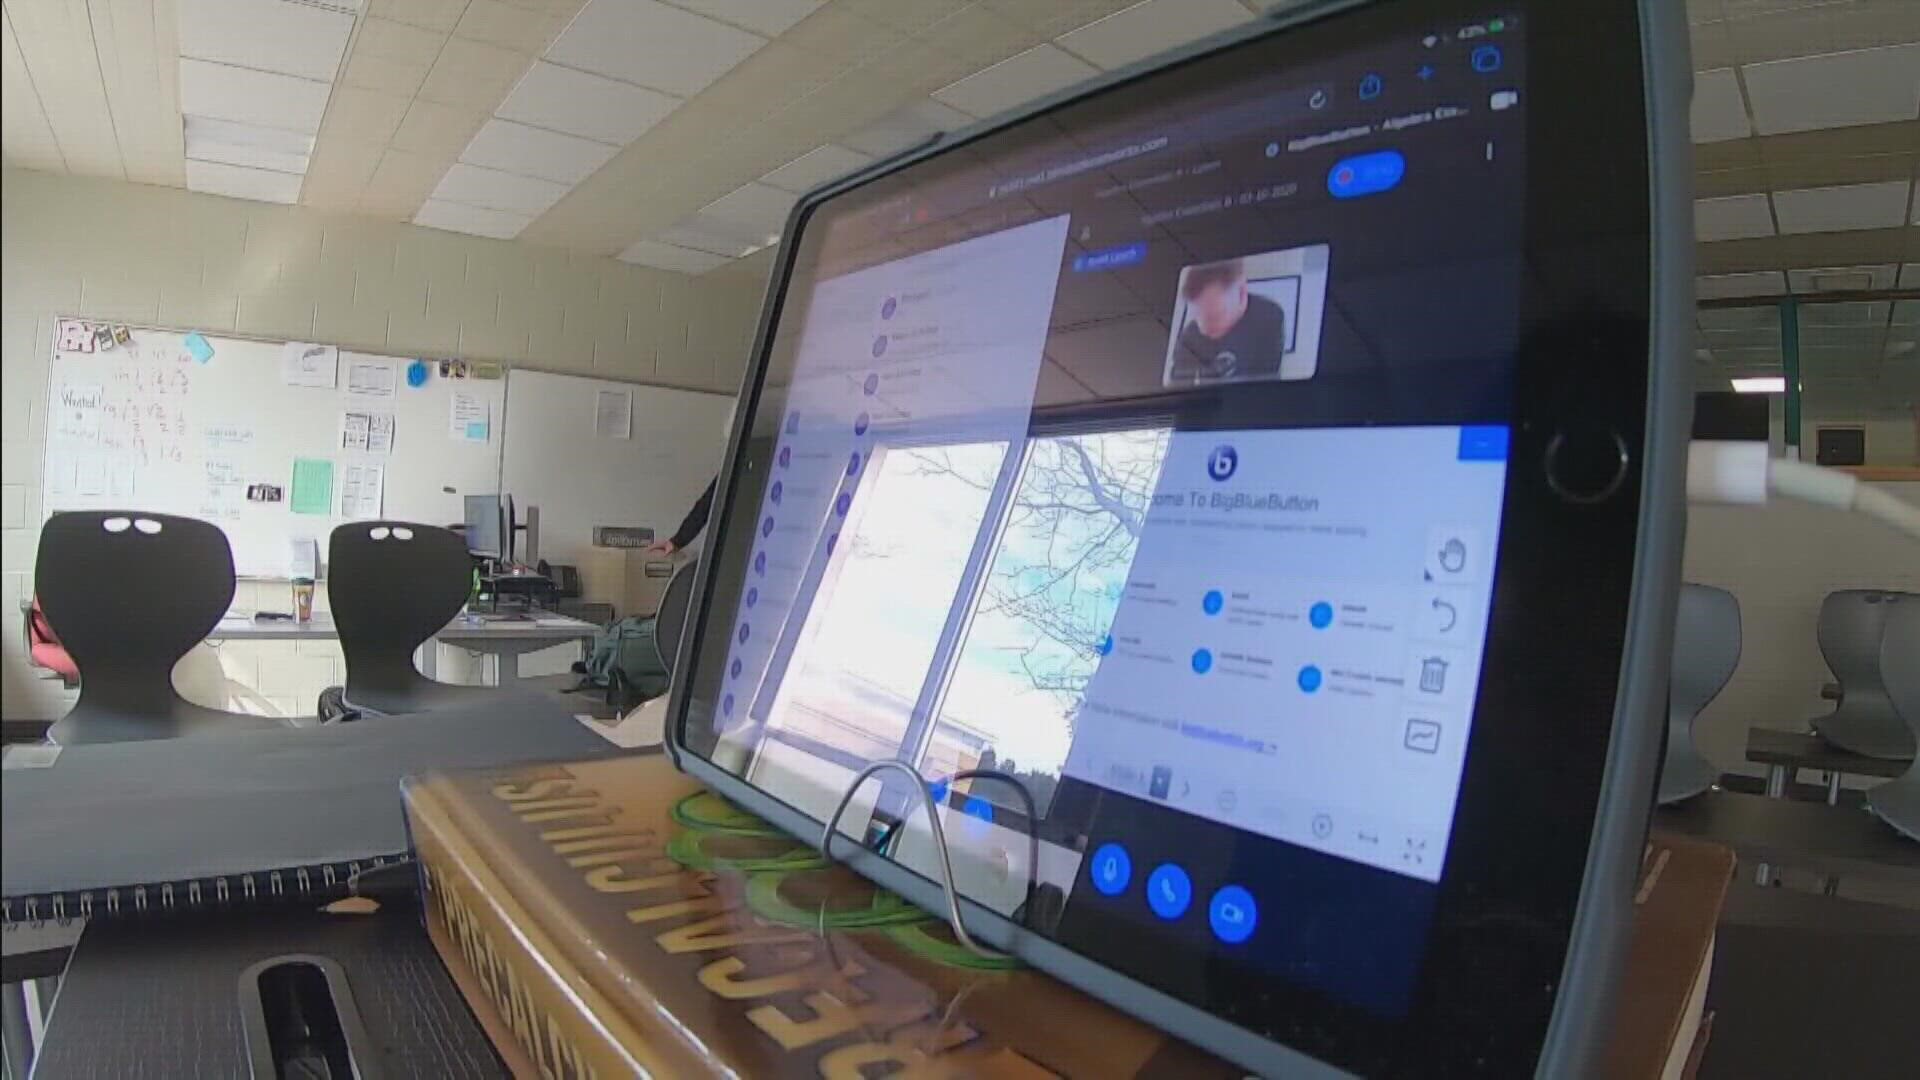 Virtual learning has been around for years now, but it became very popular when school districts across West Michigan started remote learning.